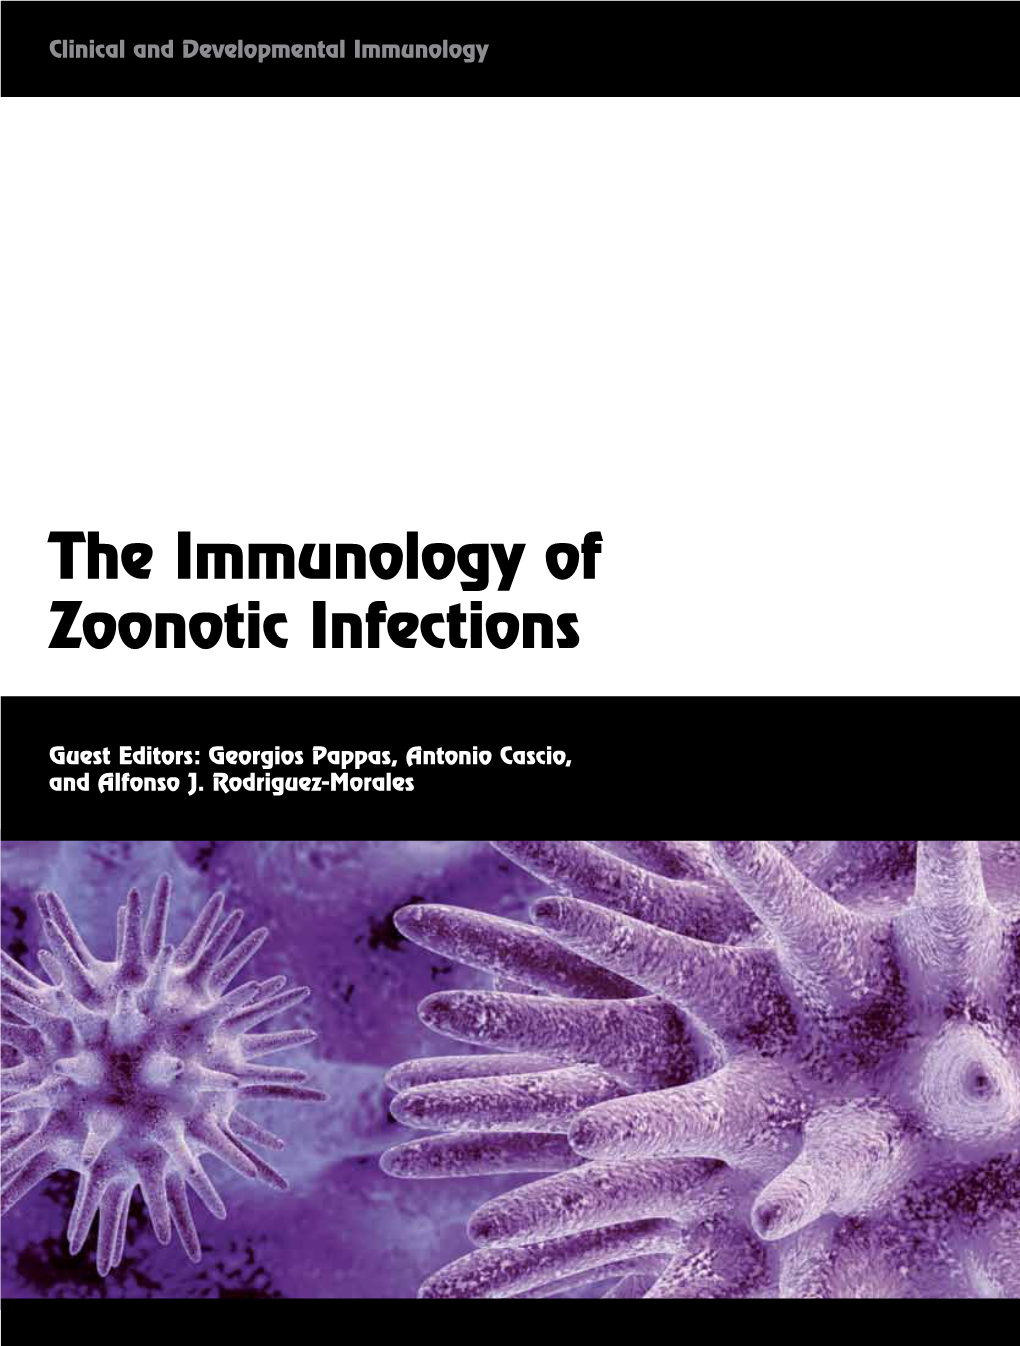 The Immunology of Zoonotic Infections